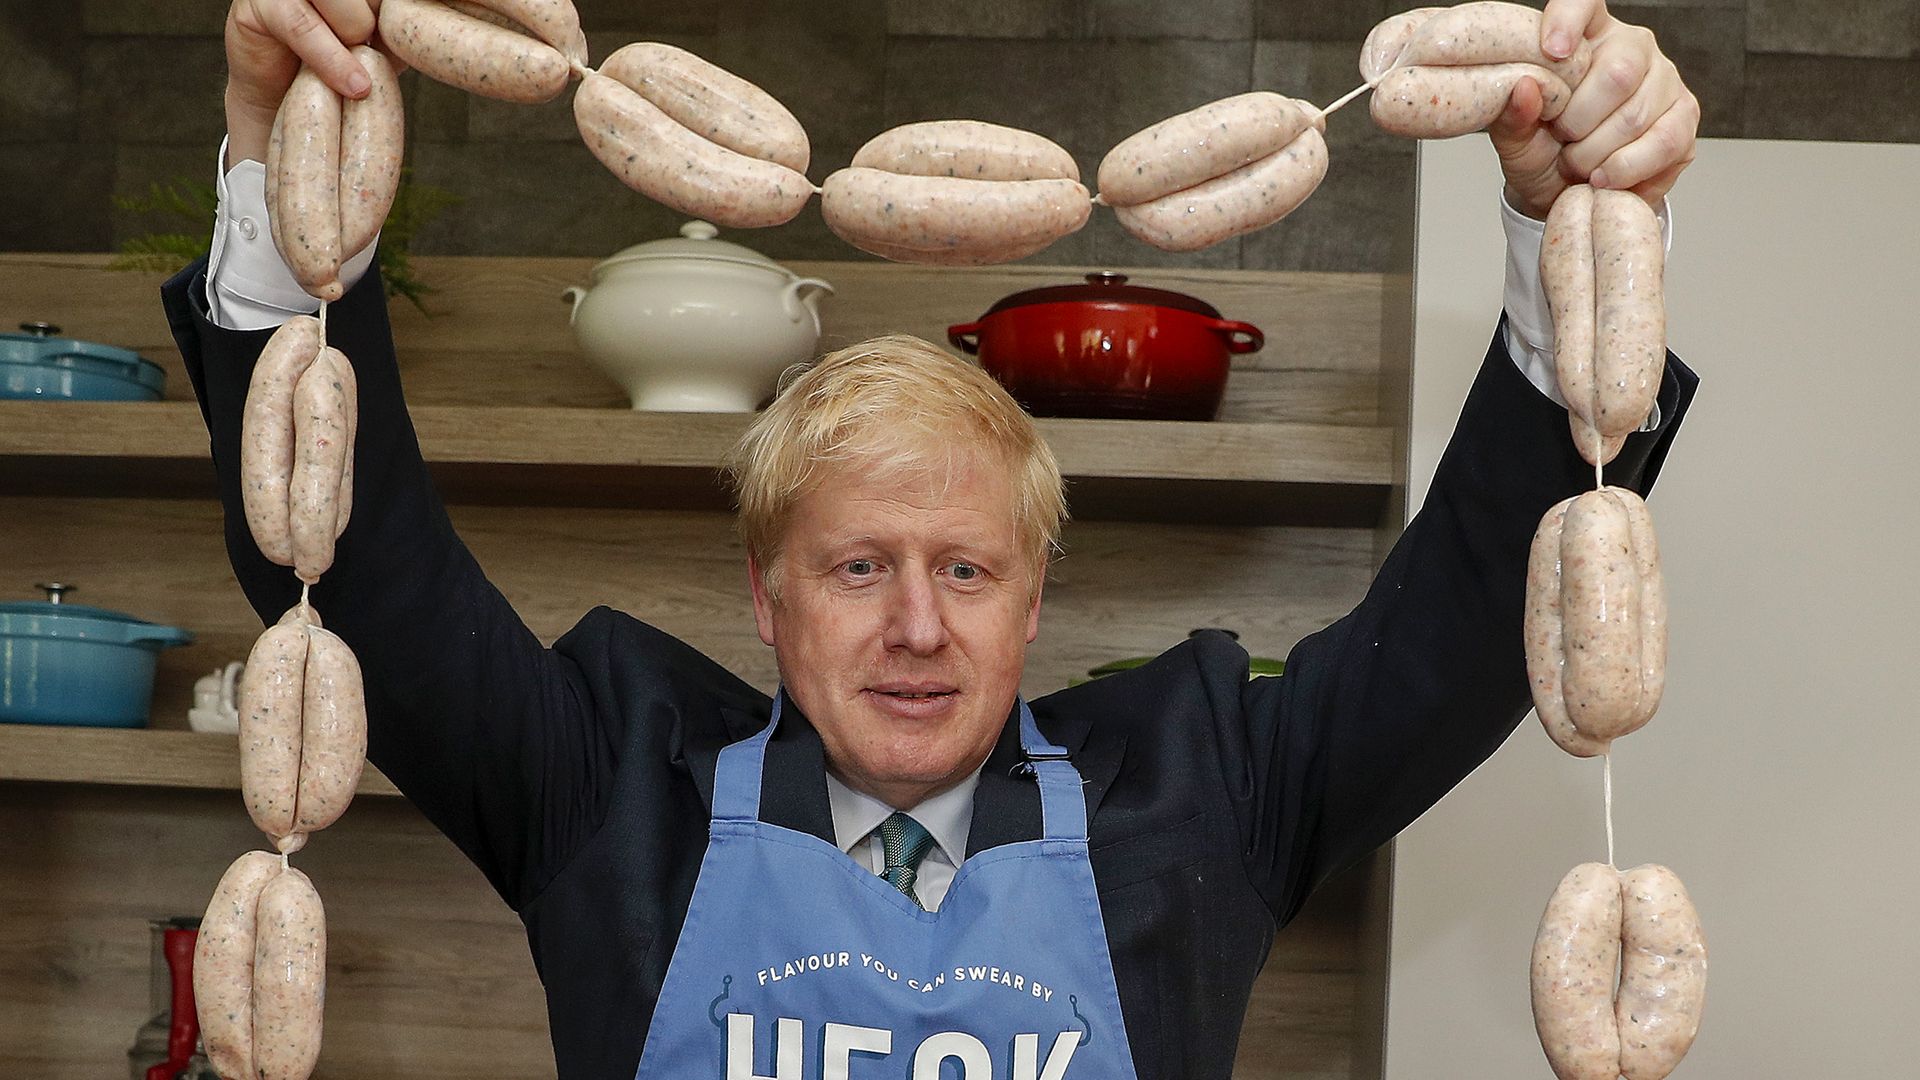 Boris Johnson holds up a string of sausages during his campaign for the Tory leadership. Credit: PA